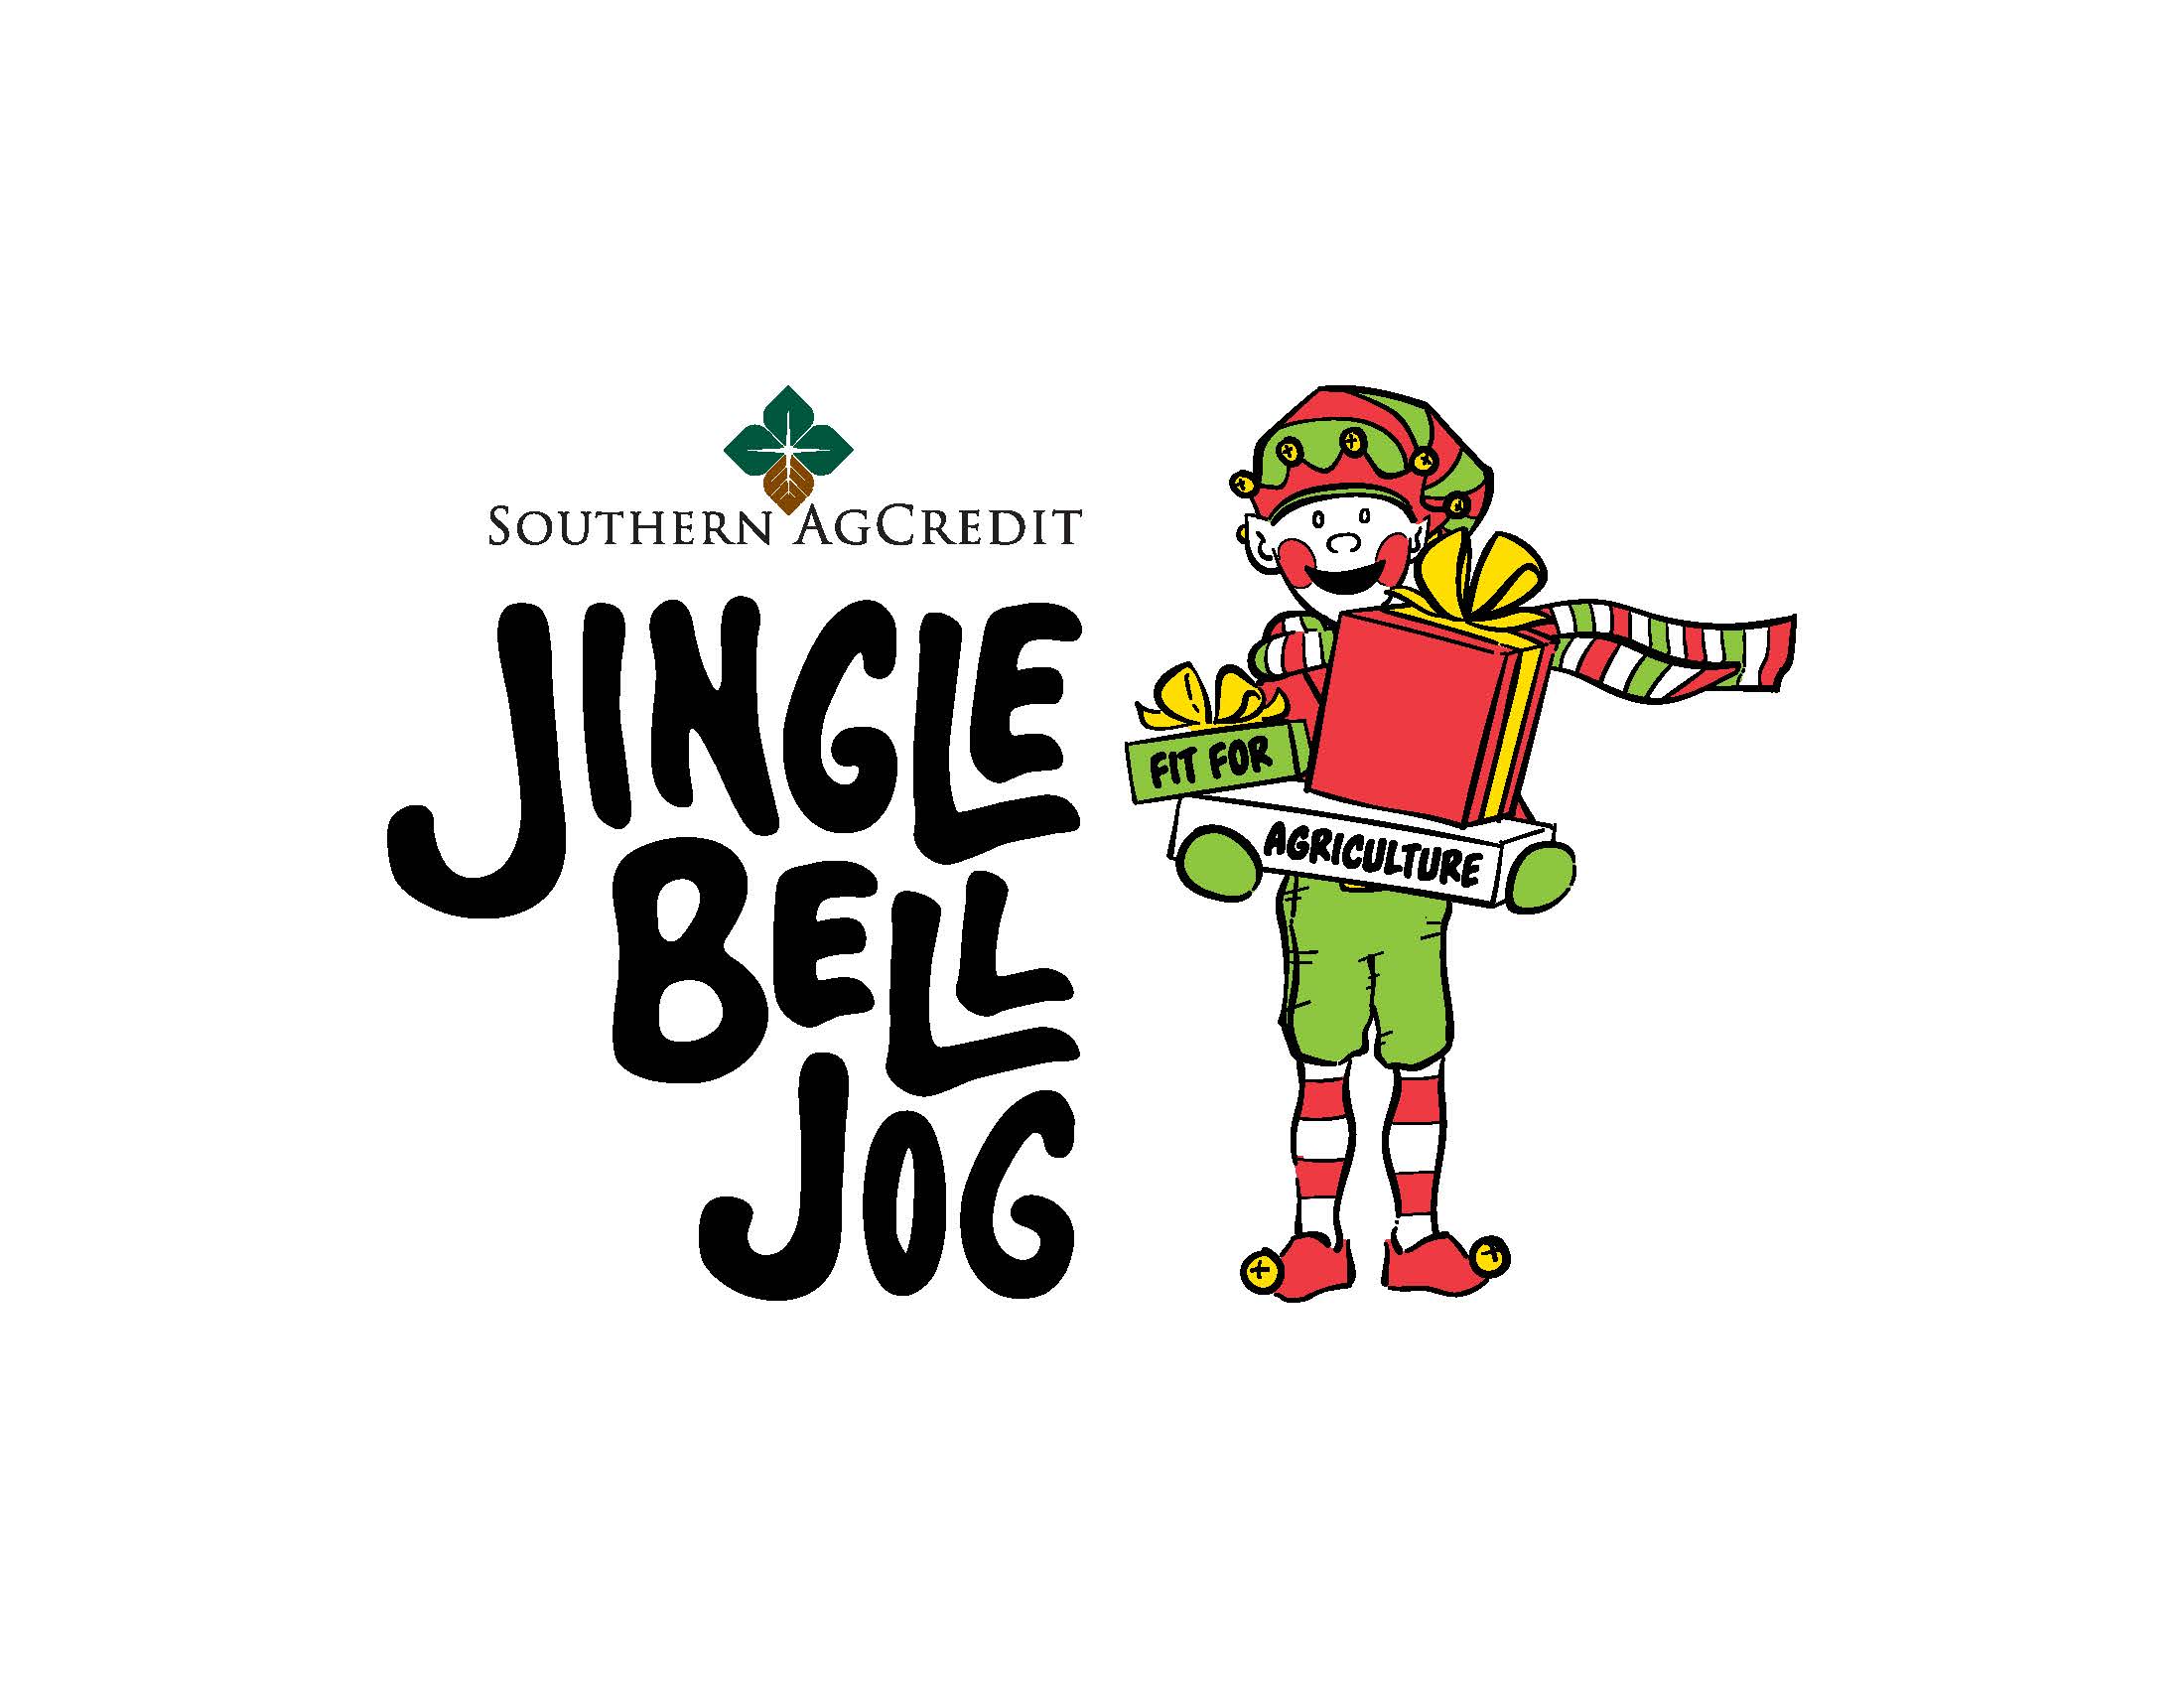 Jingle Bell Jog – turn by turn directions for all races